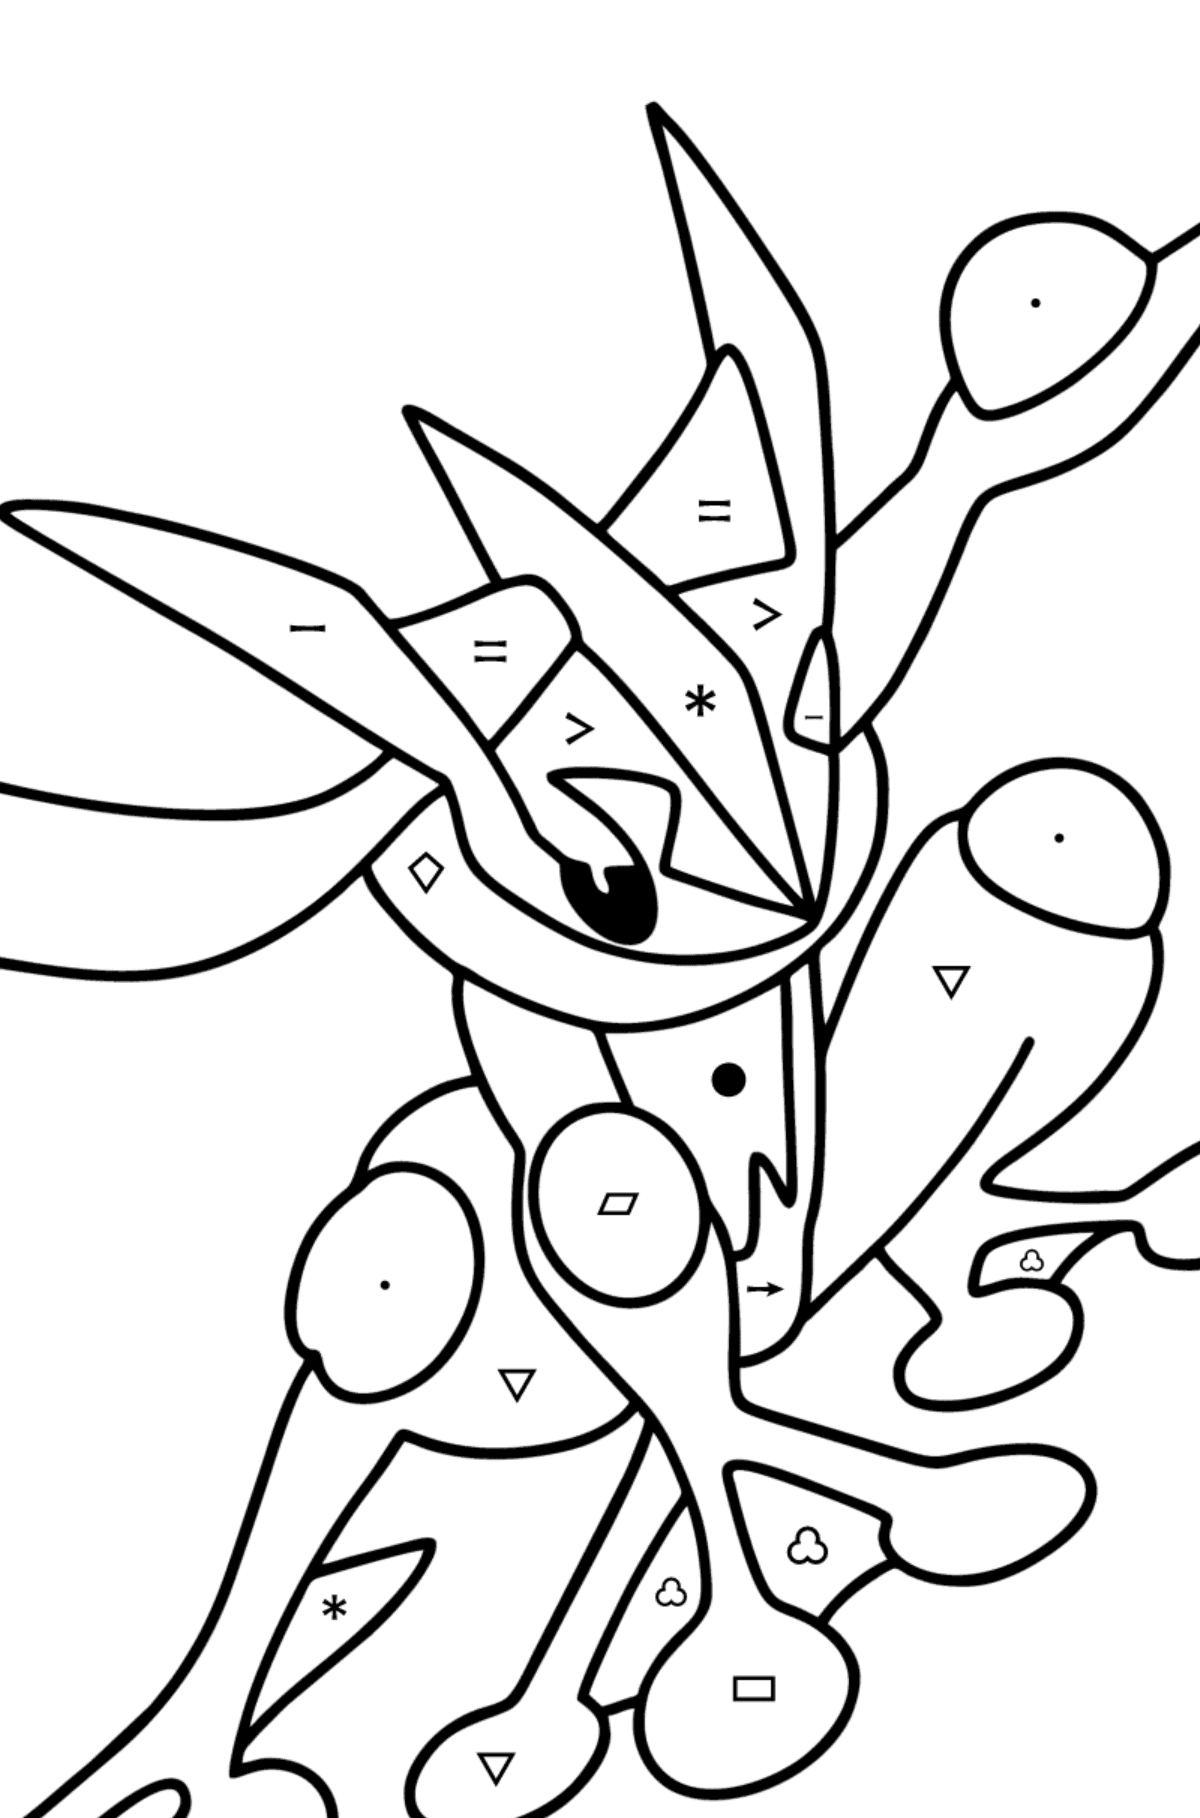 Coloring page Pokemon Go Greninja - Coloring by Symbols and Geometric Shapes for Kids